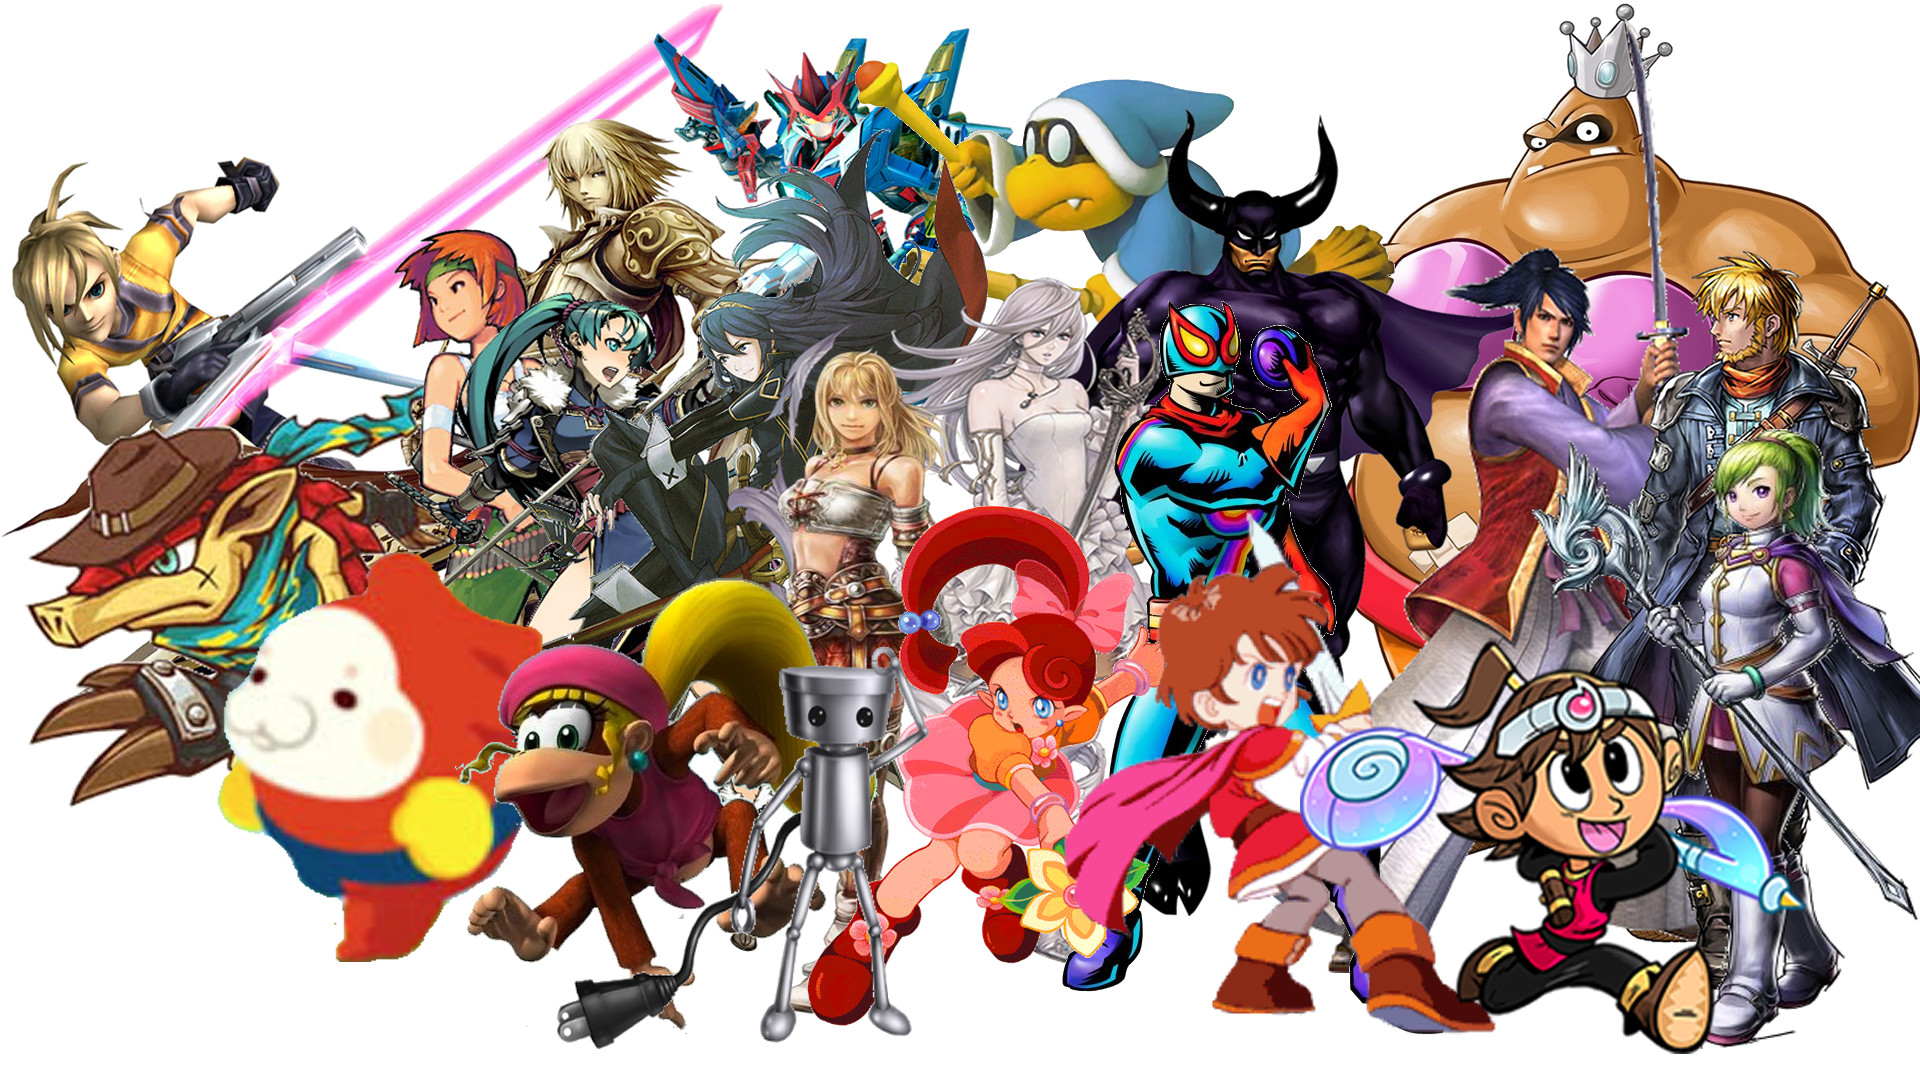 1920x1080 Video Game - Super Smash Bros. for Nintendo 3DS and Wii U Wallpaper